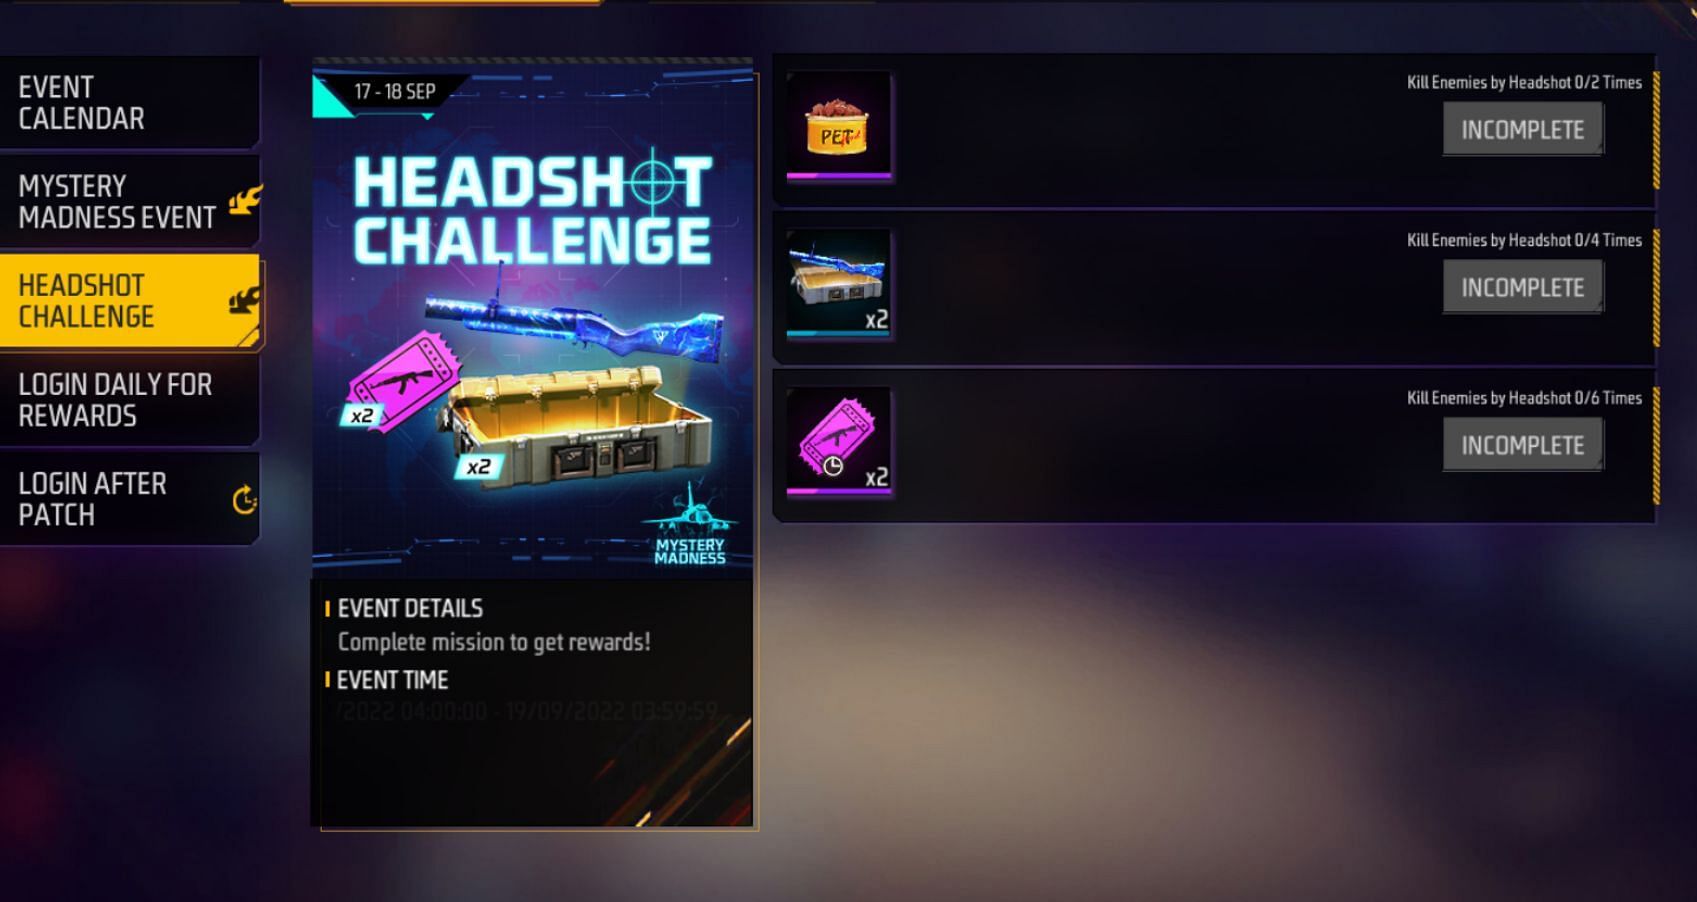 Headshot Challenge became available in Free Fire MAX on 17 September at 4:00 am (IST) {Image via Garena}